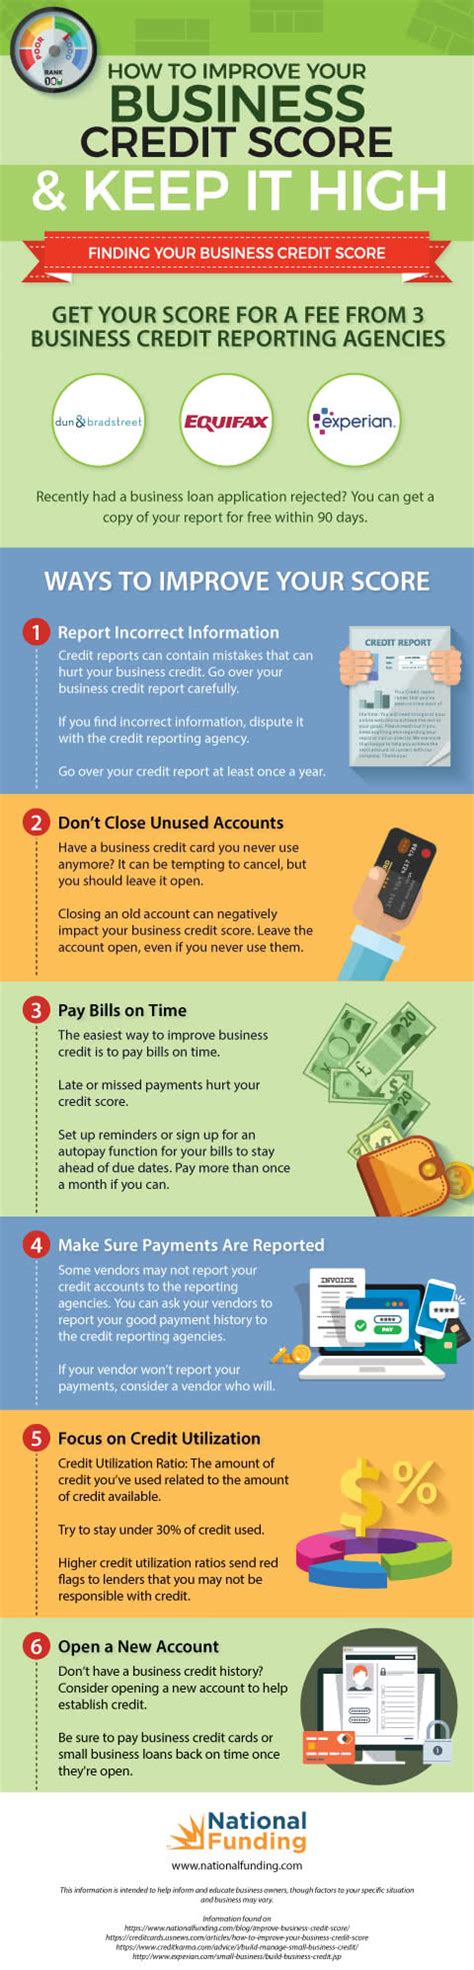 6 Ways To Improve Your Business Credit Score